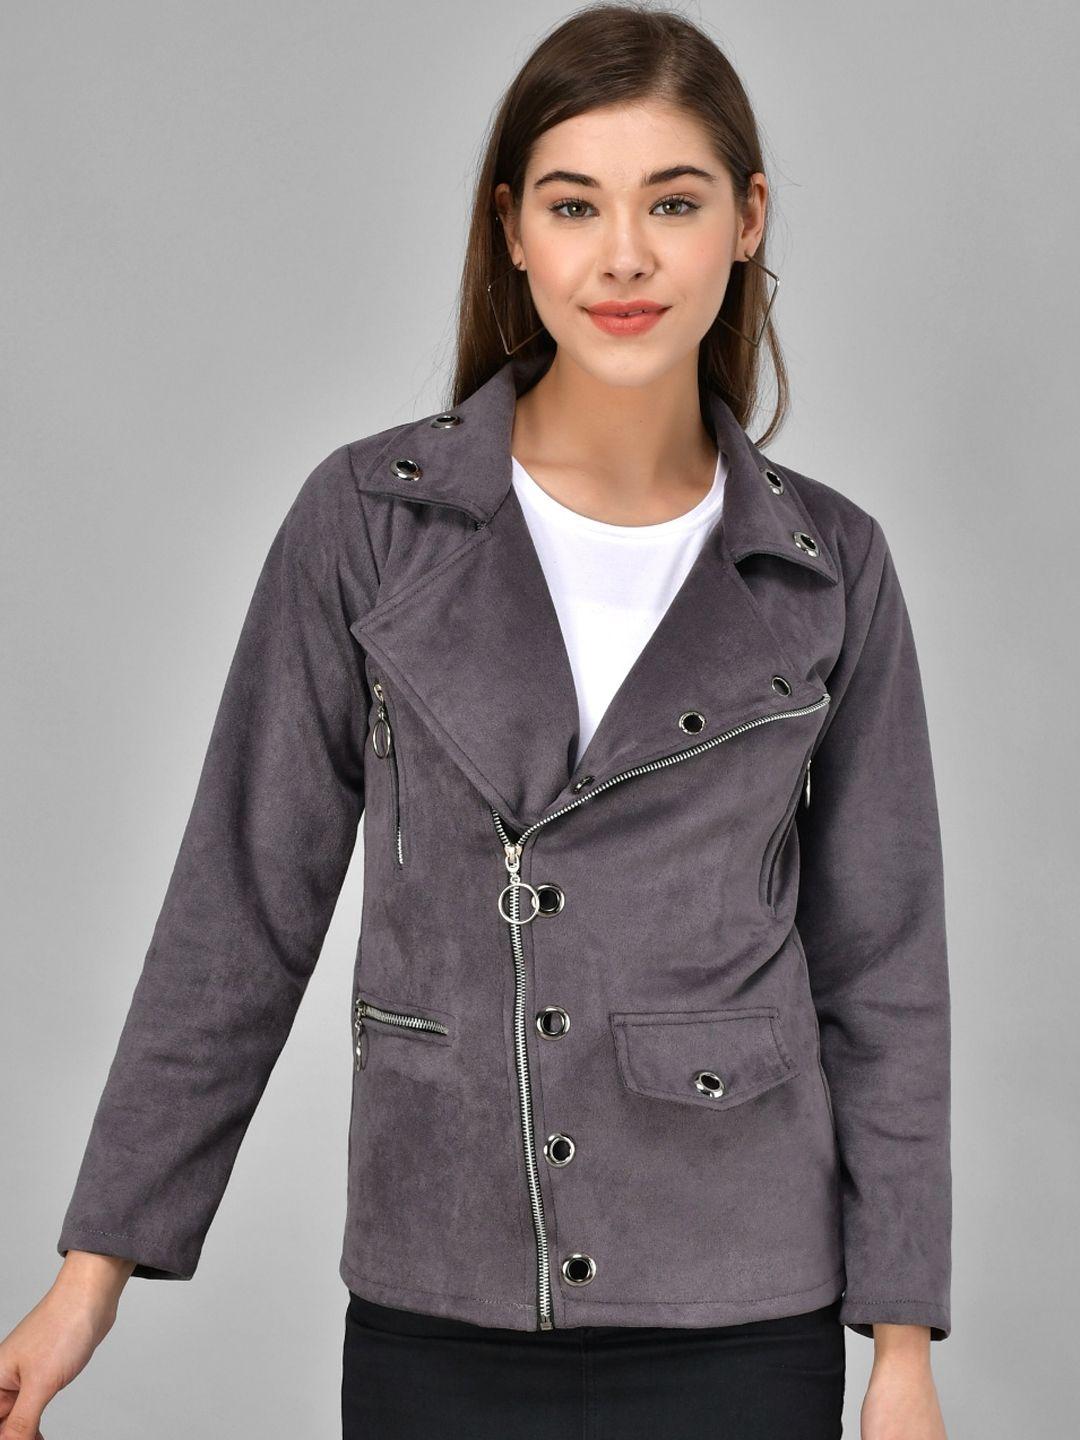 baesd lapel collar tailored jacket with studded